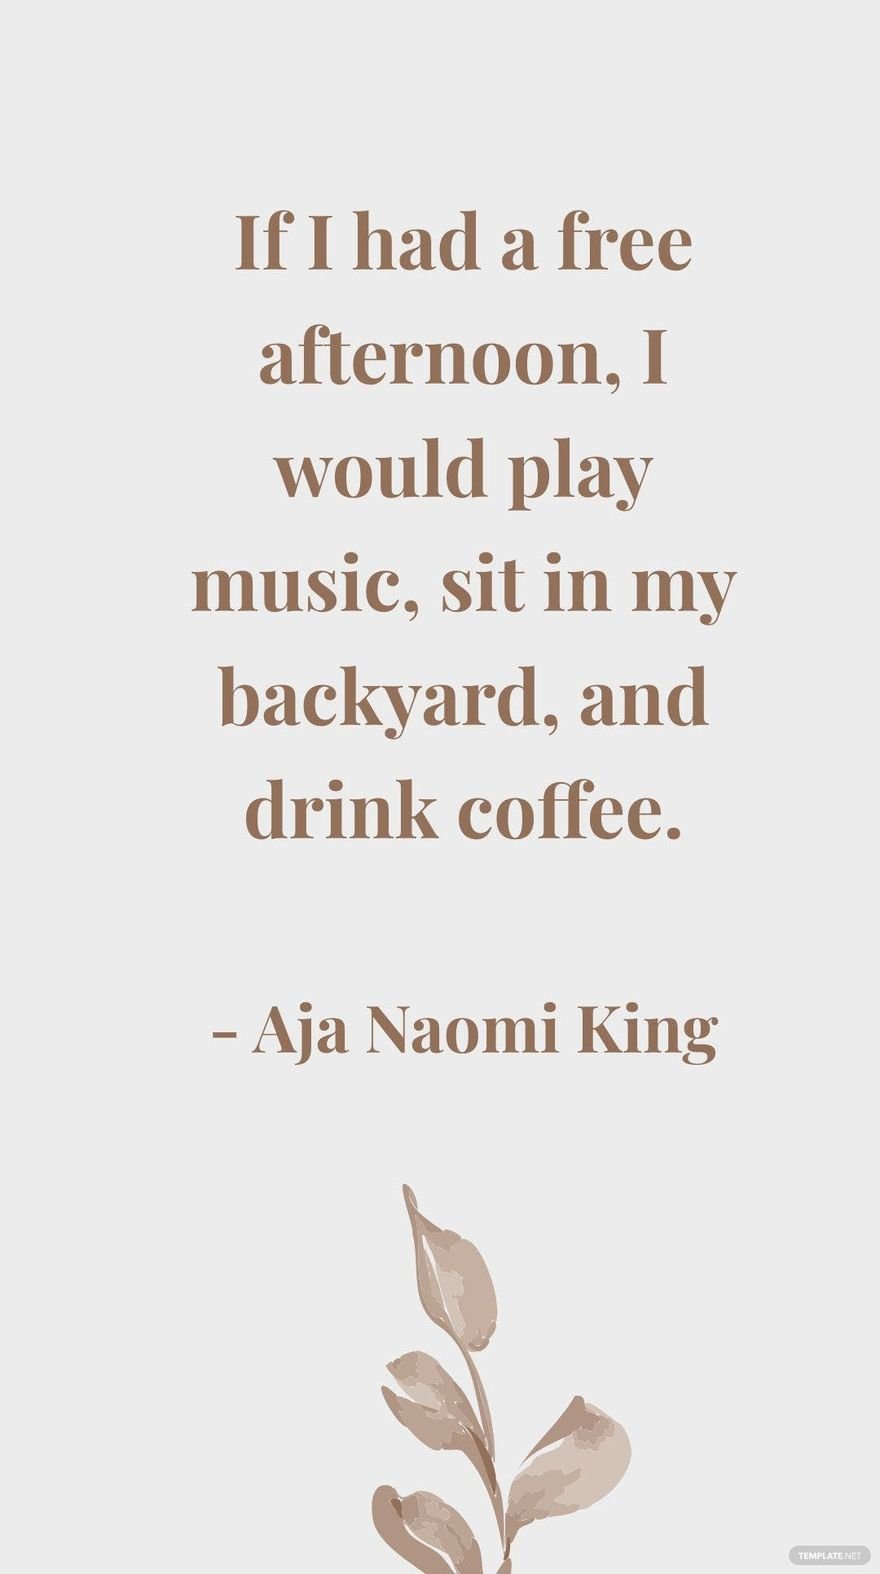 Aja Naomi King - If I had a afternoon, I would play music, sit in my backyard, and drink coffee.